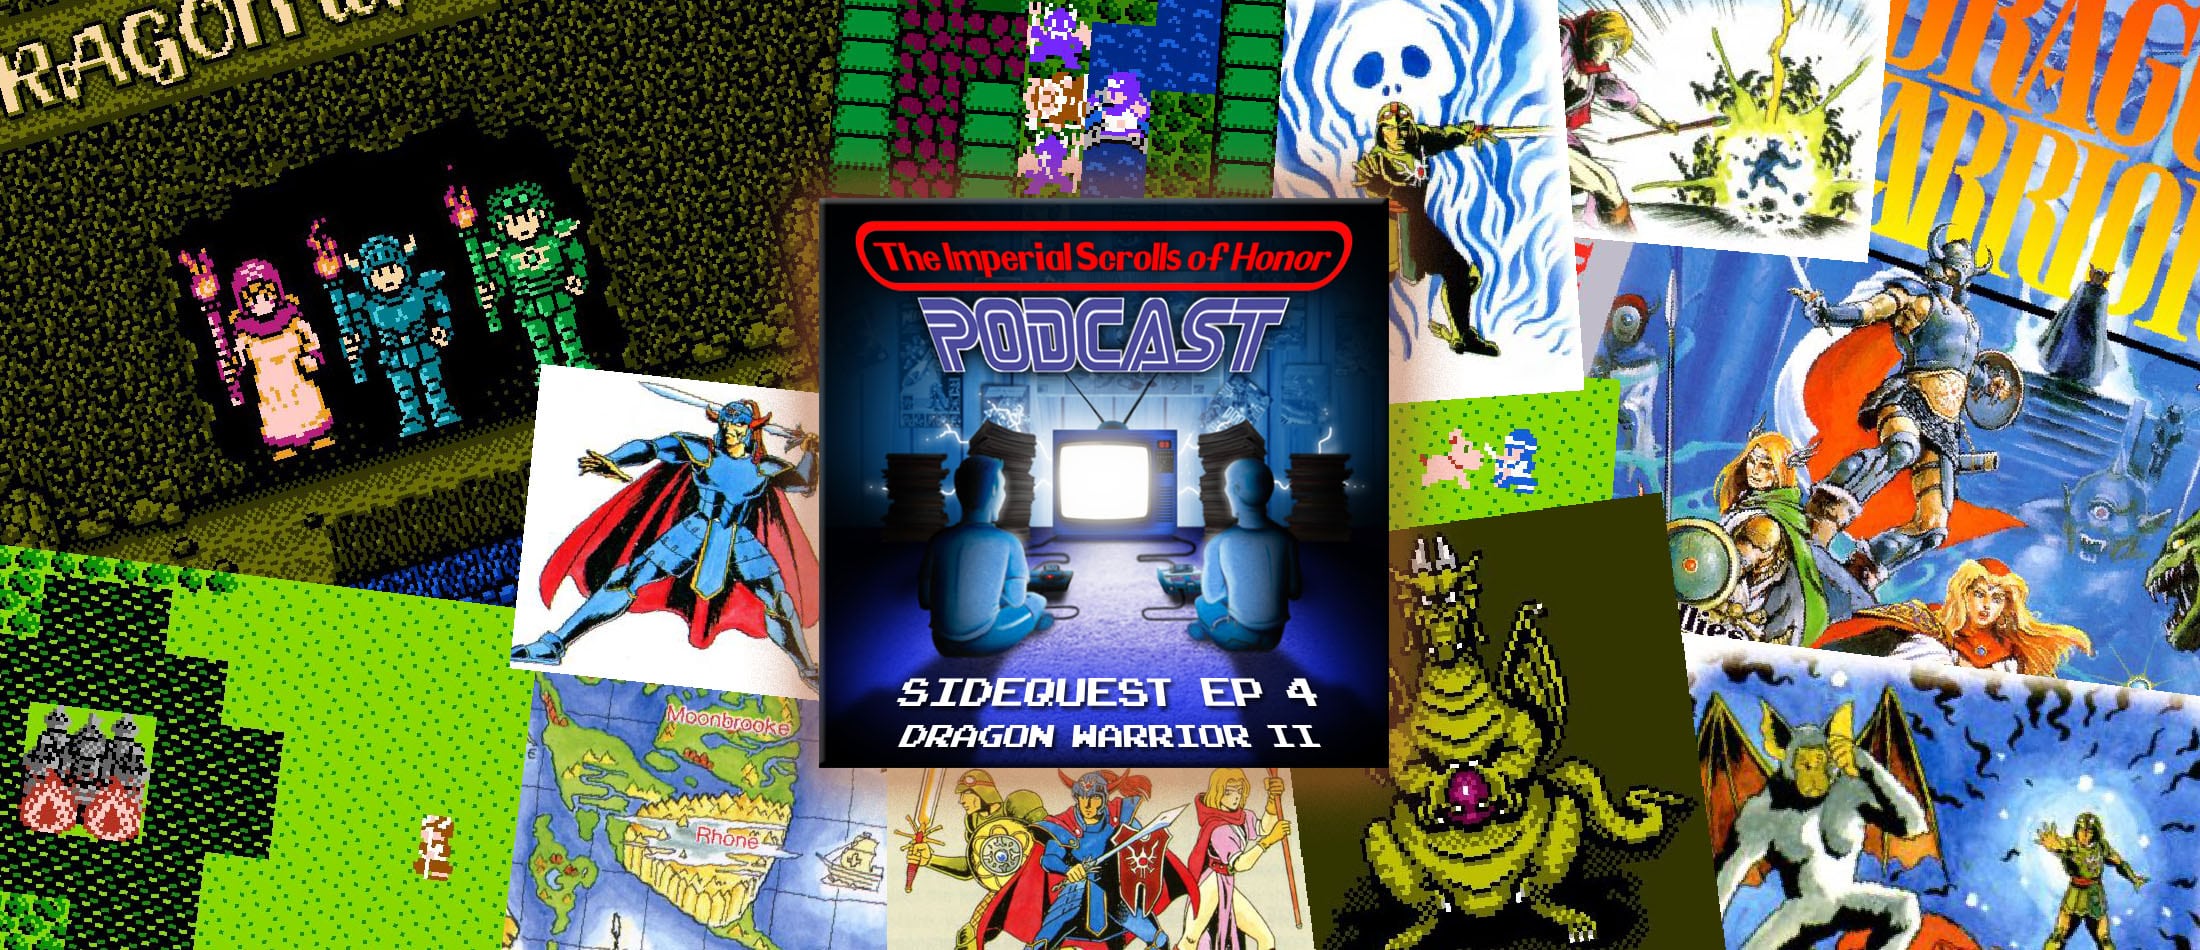 The Imperial Scrolls of Honor Podcast - SIDEQUEST: Dragon Warrior II Ep 4